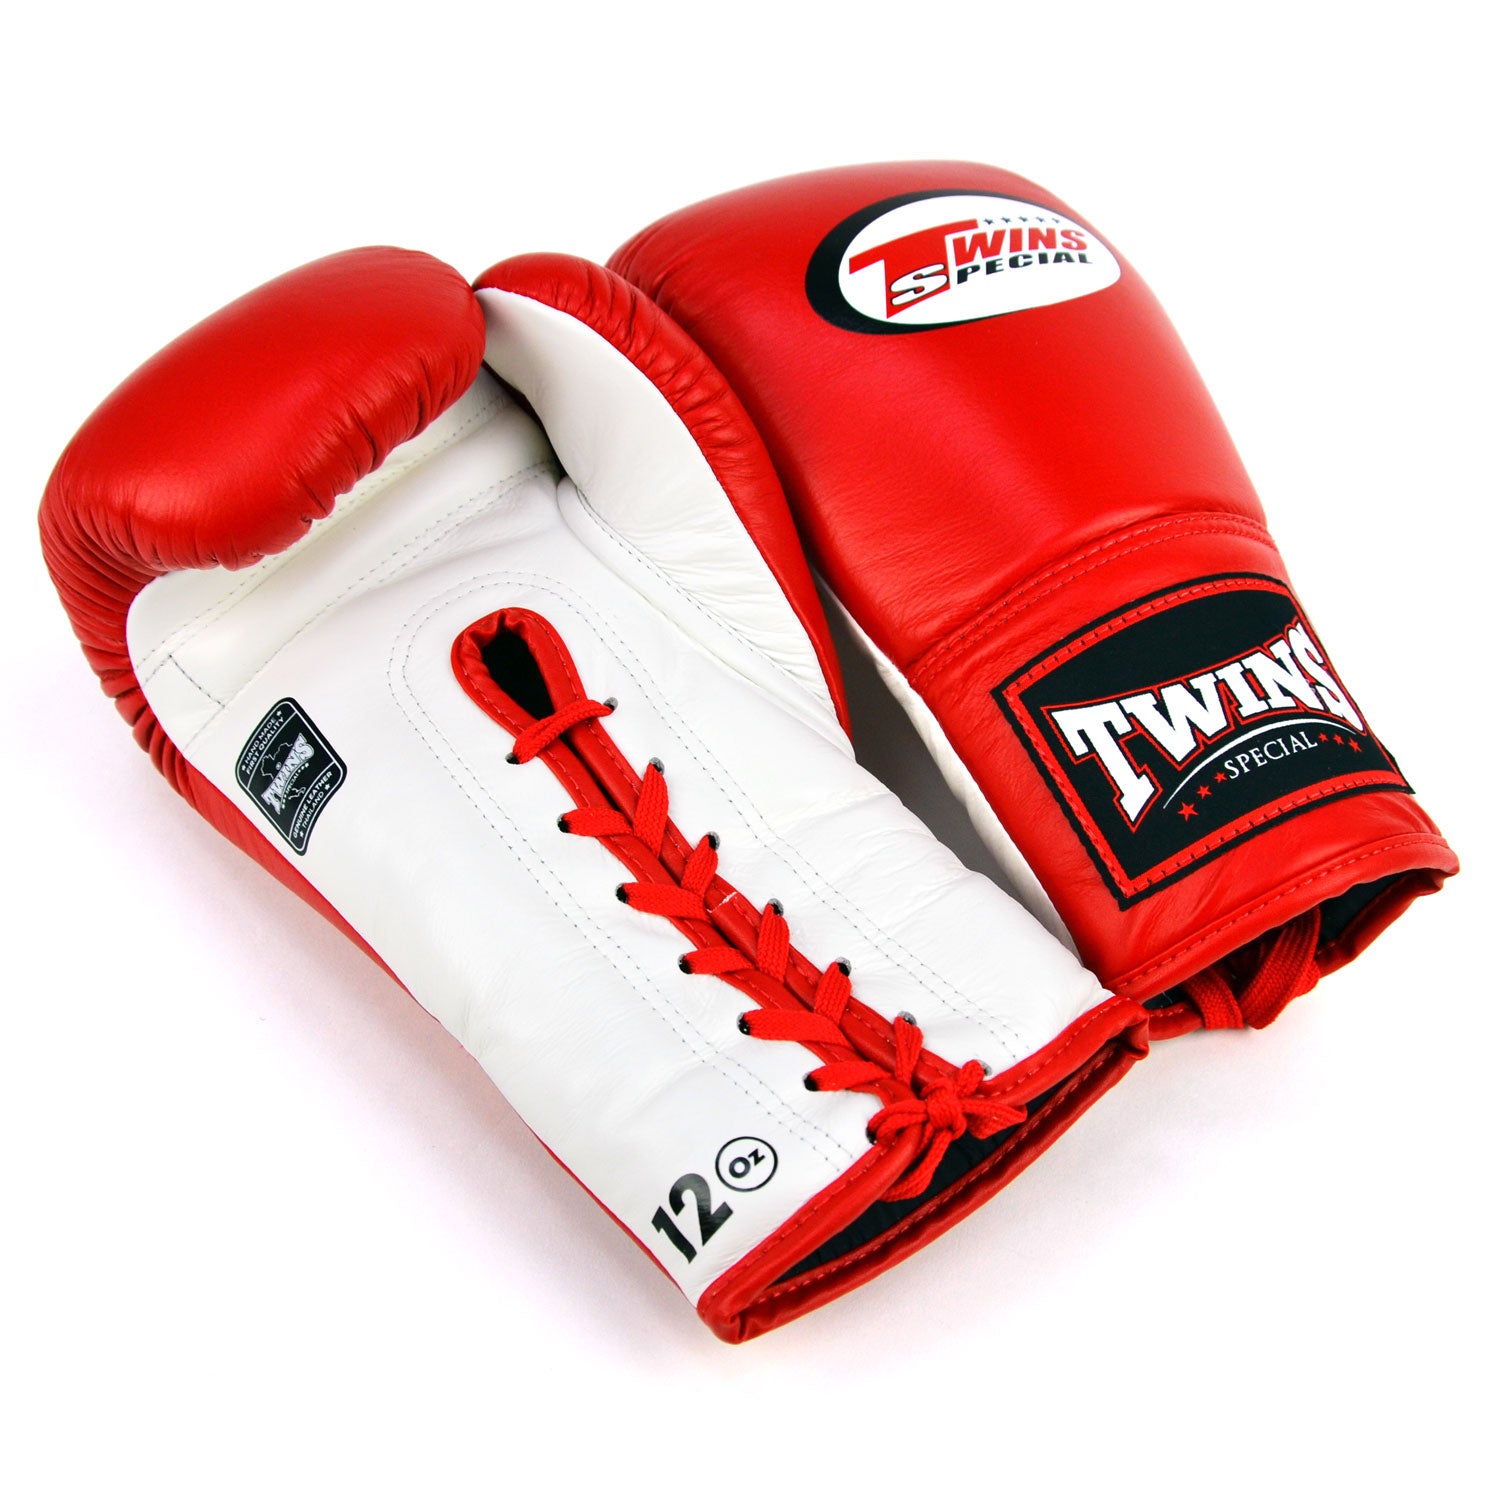 BGLL1 Twins Lace-up Boxing Gloves Red-White